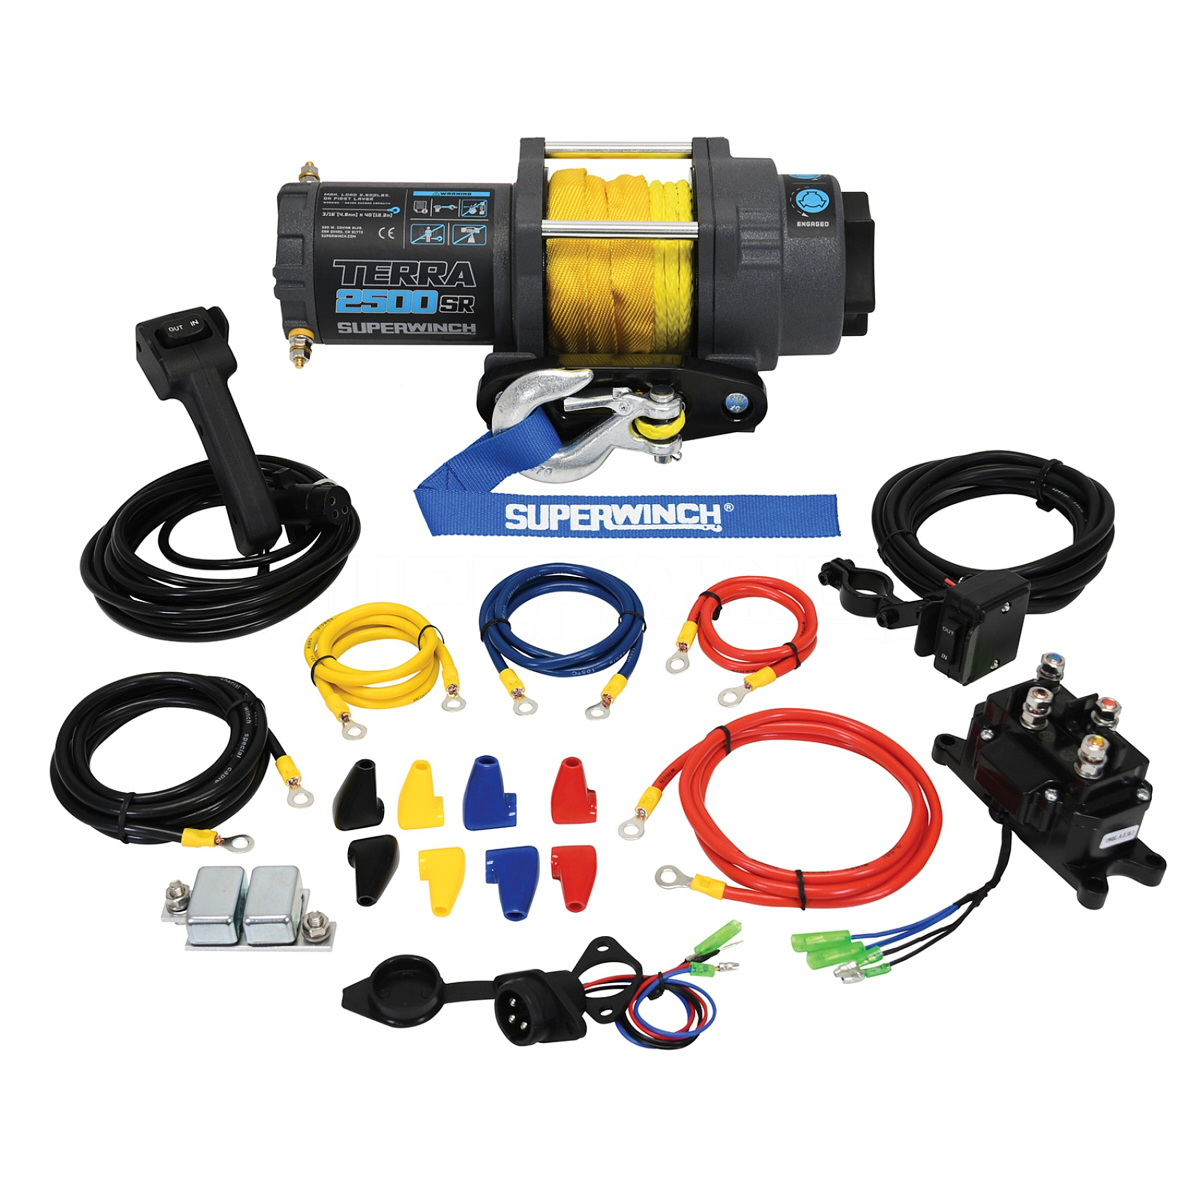 SuperWinch 1125270 Winch, Terra, 2500 lb Capacity, Hawse Fairlead, 10 ft Remote, 3/16 in x 40 ft Synthetic Rope, 12V, Kit